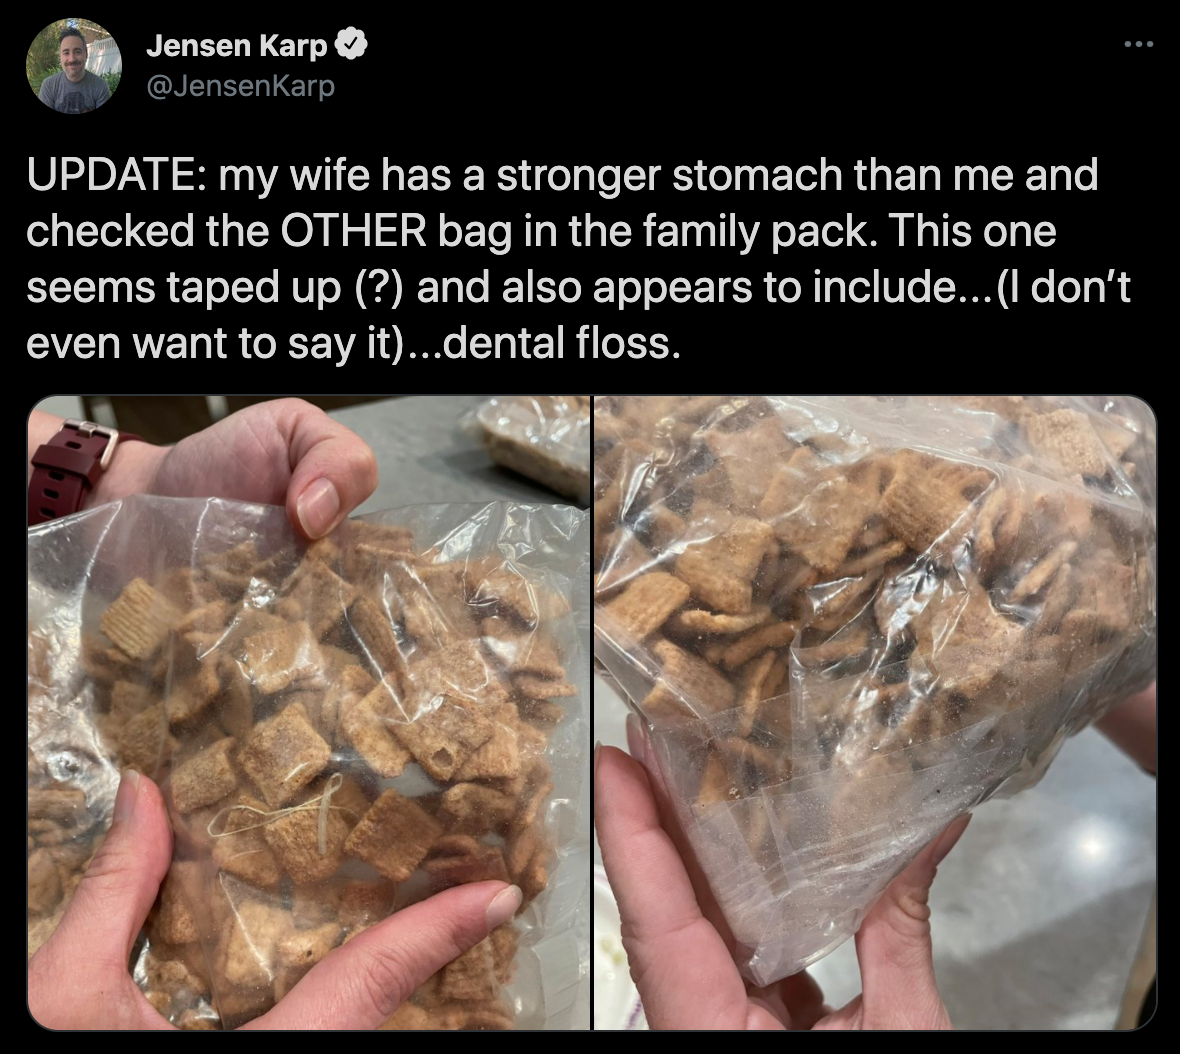 cinnamon toast crunch shrimp tails - Jensen Karp Update my wife has a stronger stomach than me and checked the Other bag in the family pack. This one seems taped up ? and also appears to include... I don't even want to say it...dental floss.